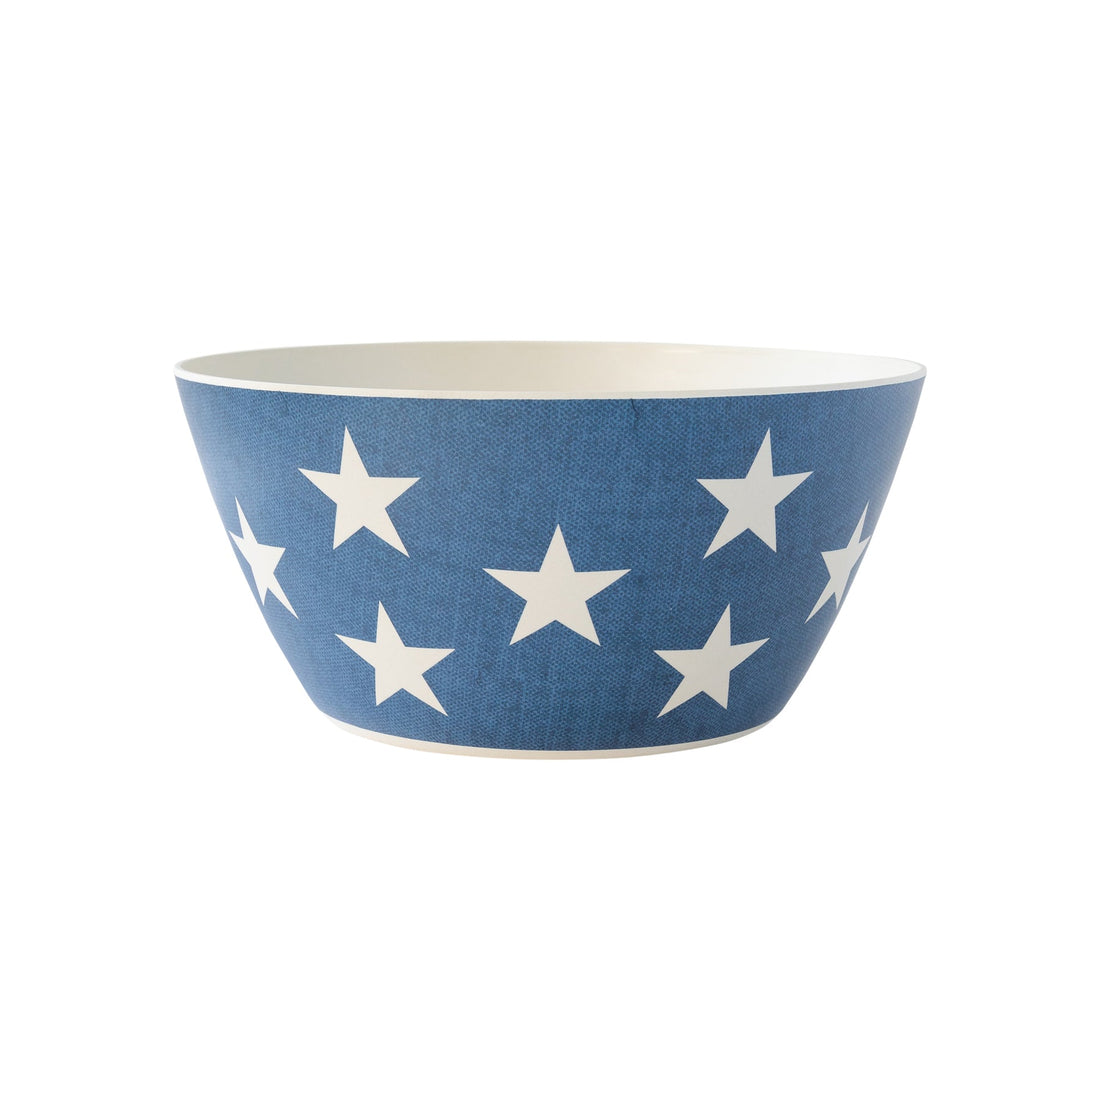 10&quot; round, navy with white stars serving bowl on white background.